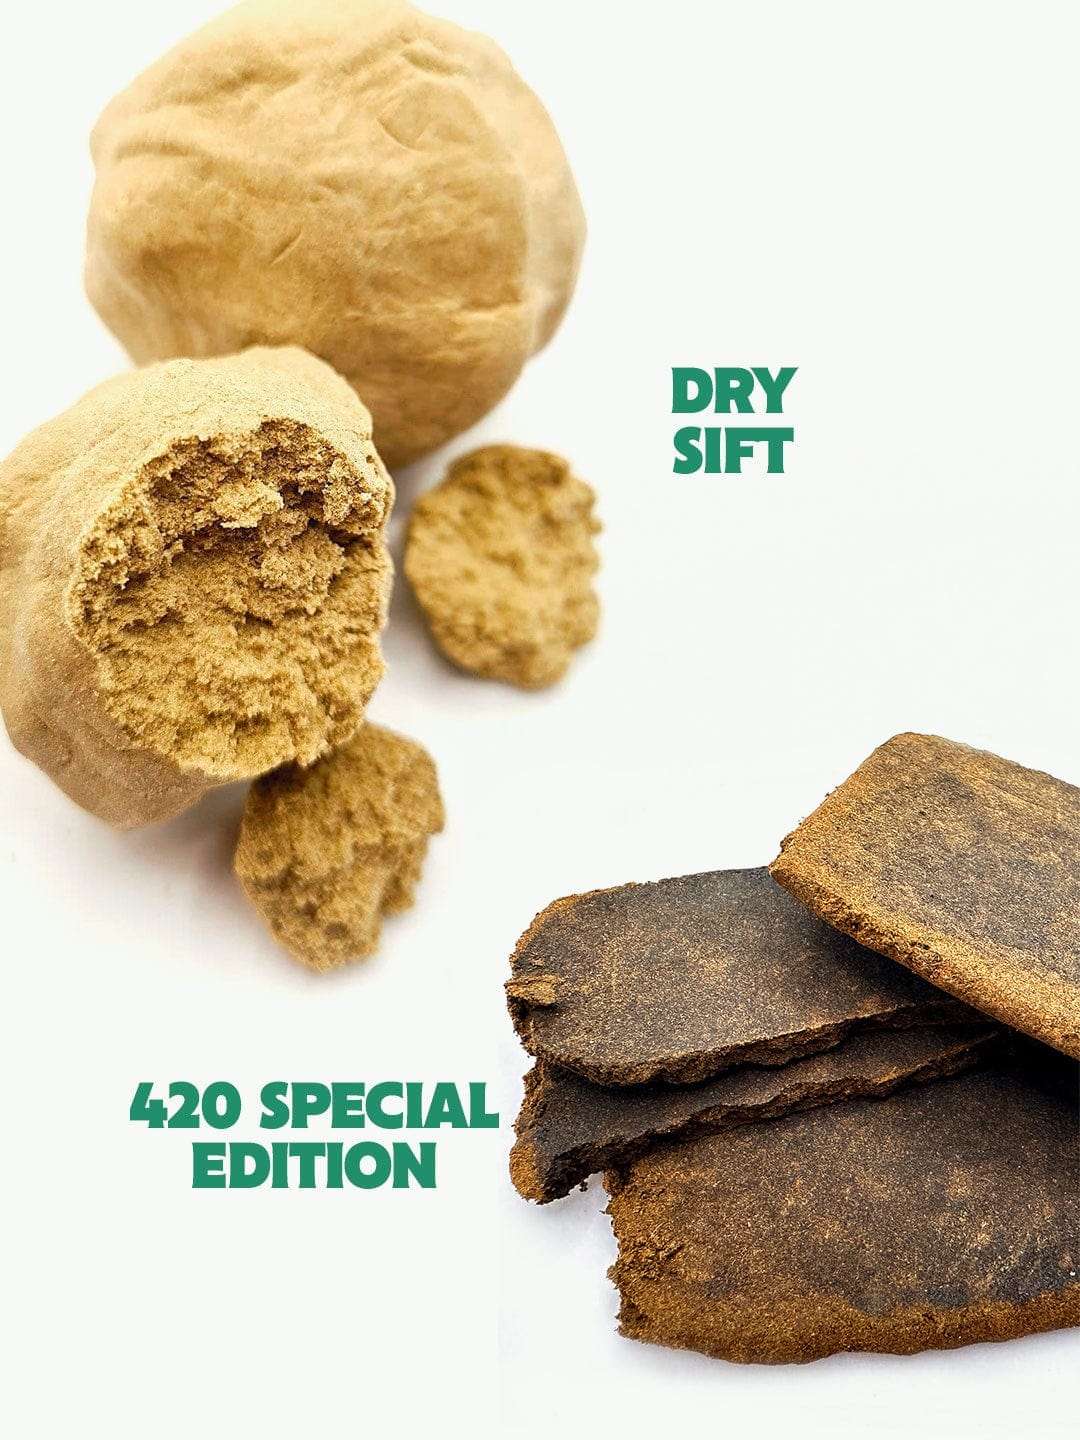 #420 Special Edition and Dry Sift Hash Bundle